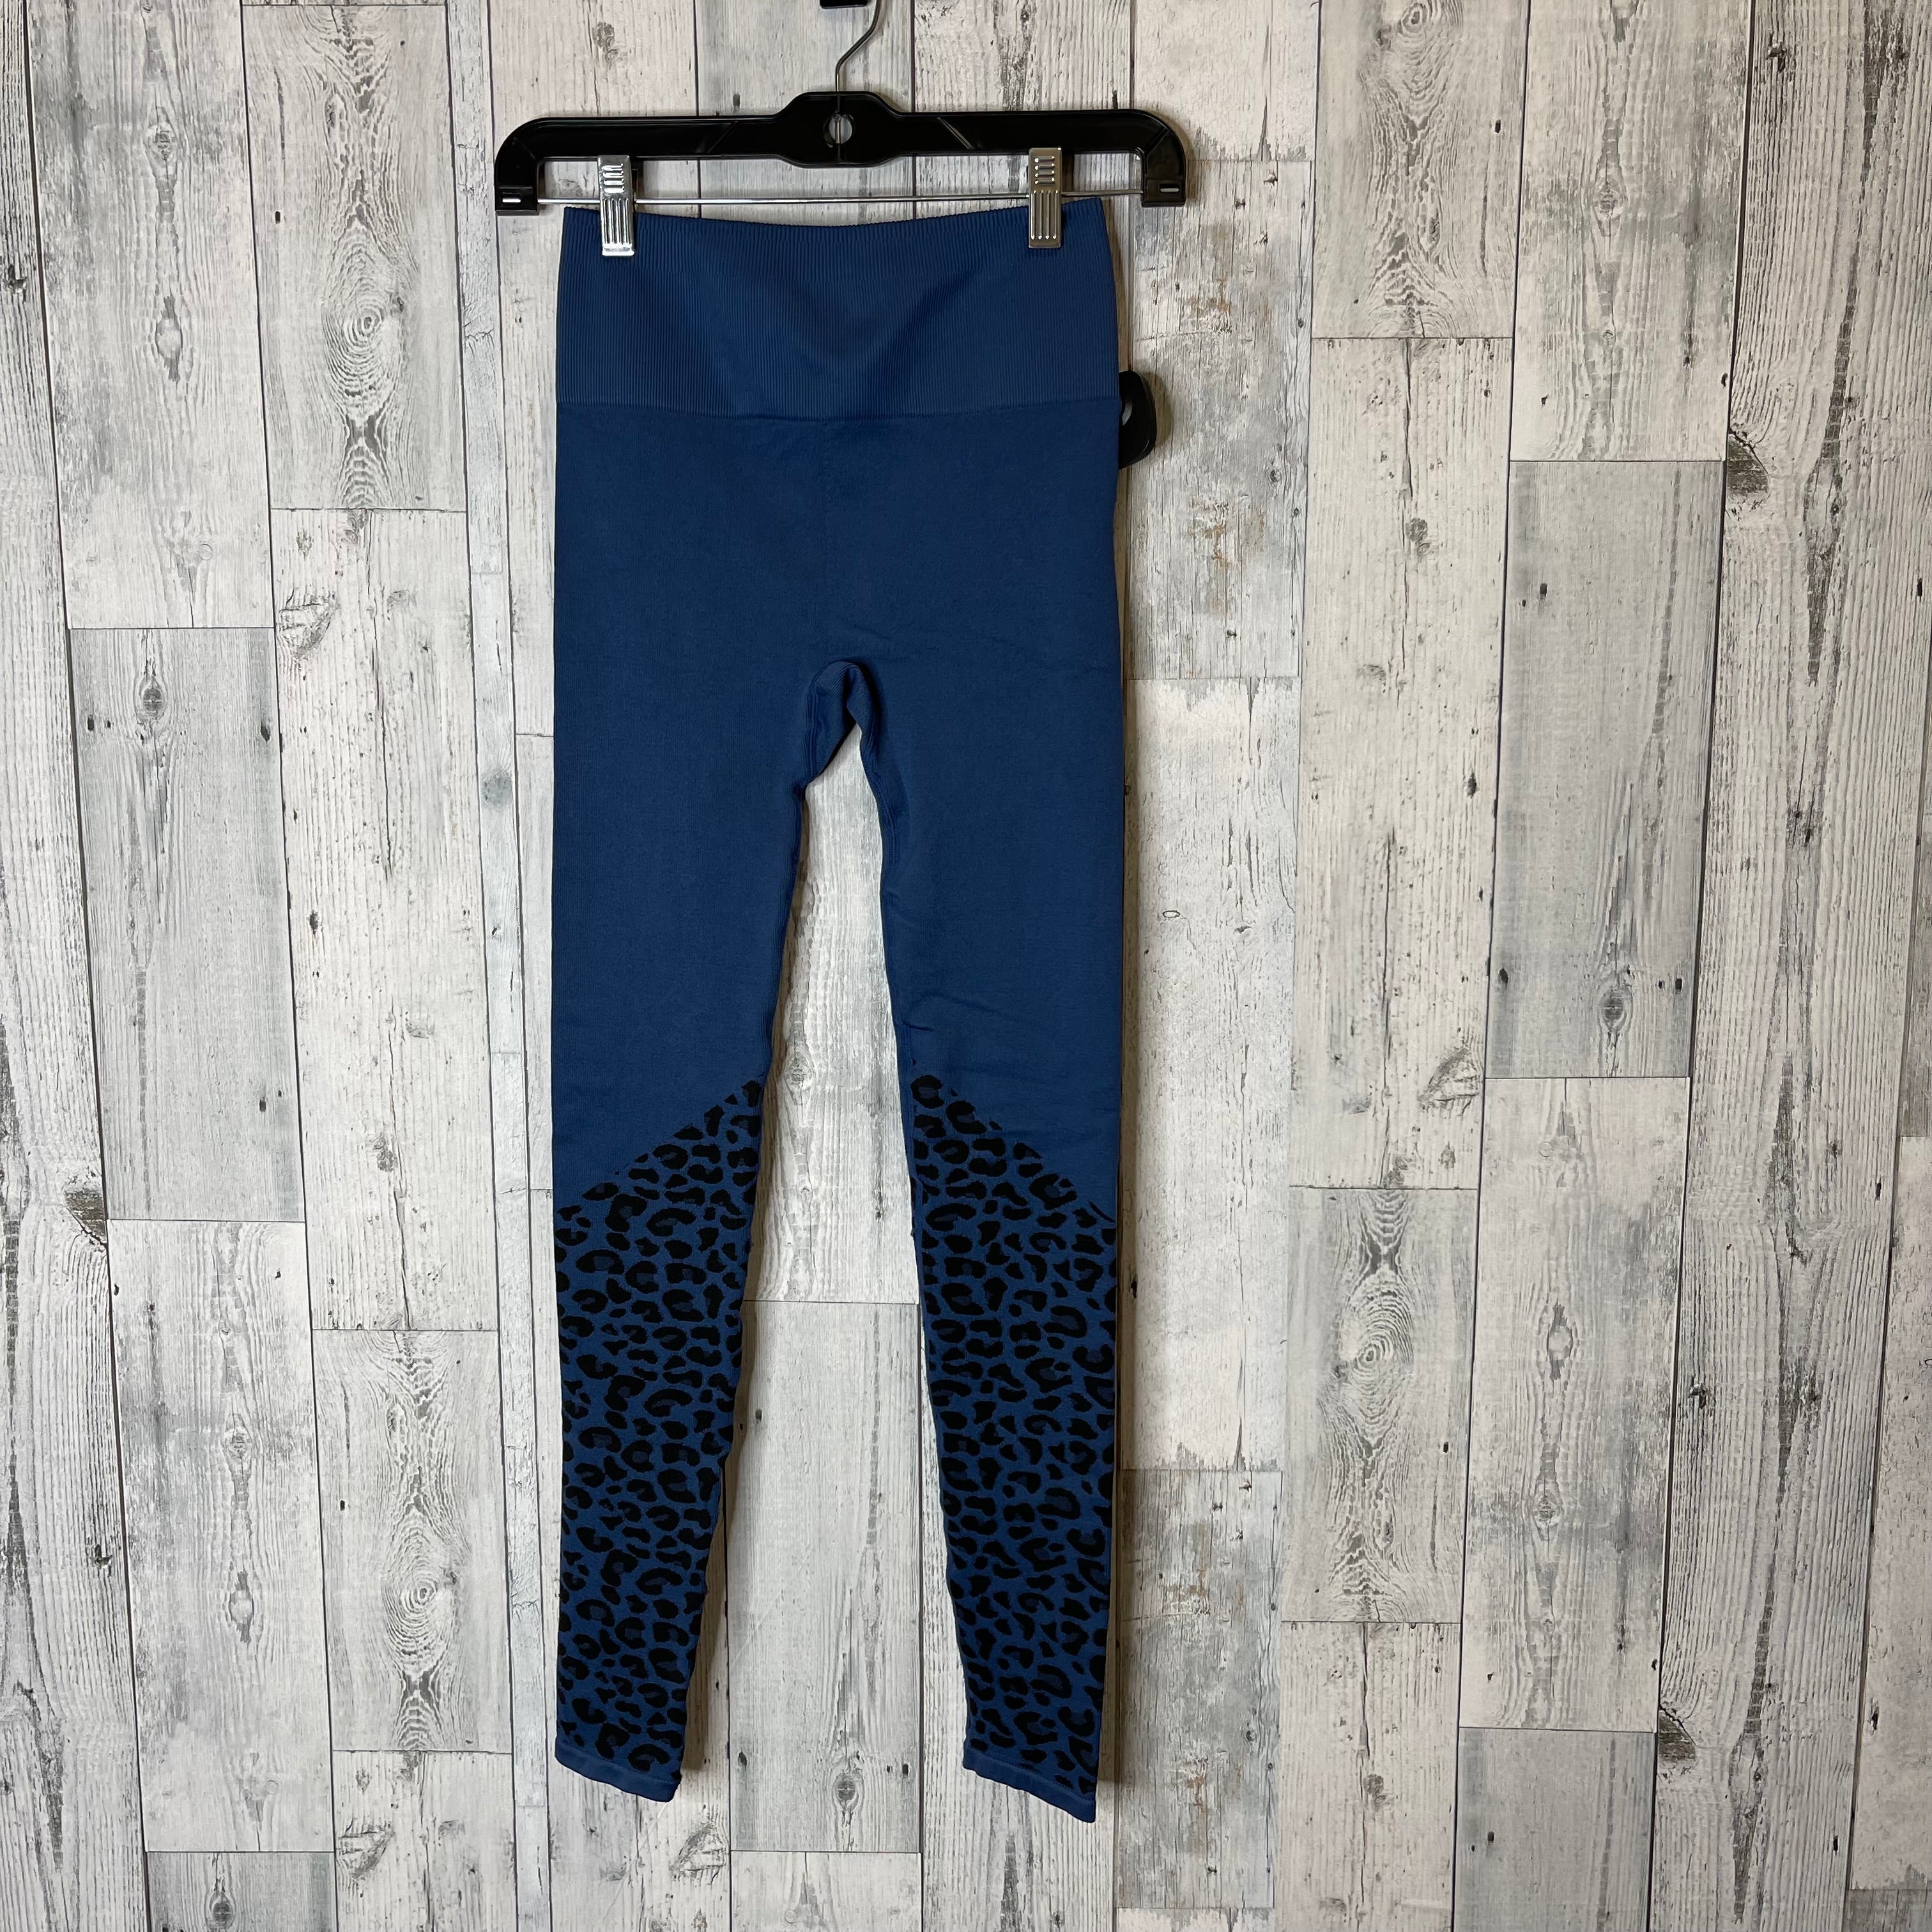 https://www.pandcboutiques.shop/wp-content/uploads/1710/77/buy-17-59-usd-for-athletic-leggings-by-fabletics-size-xs-browse-now_0.jpg